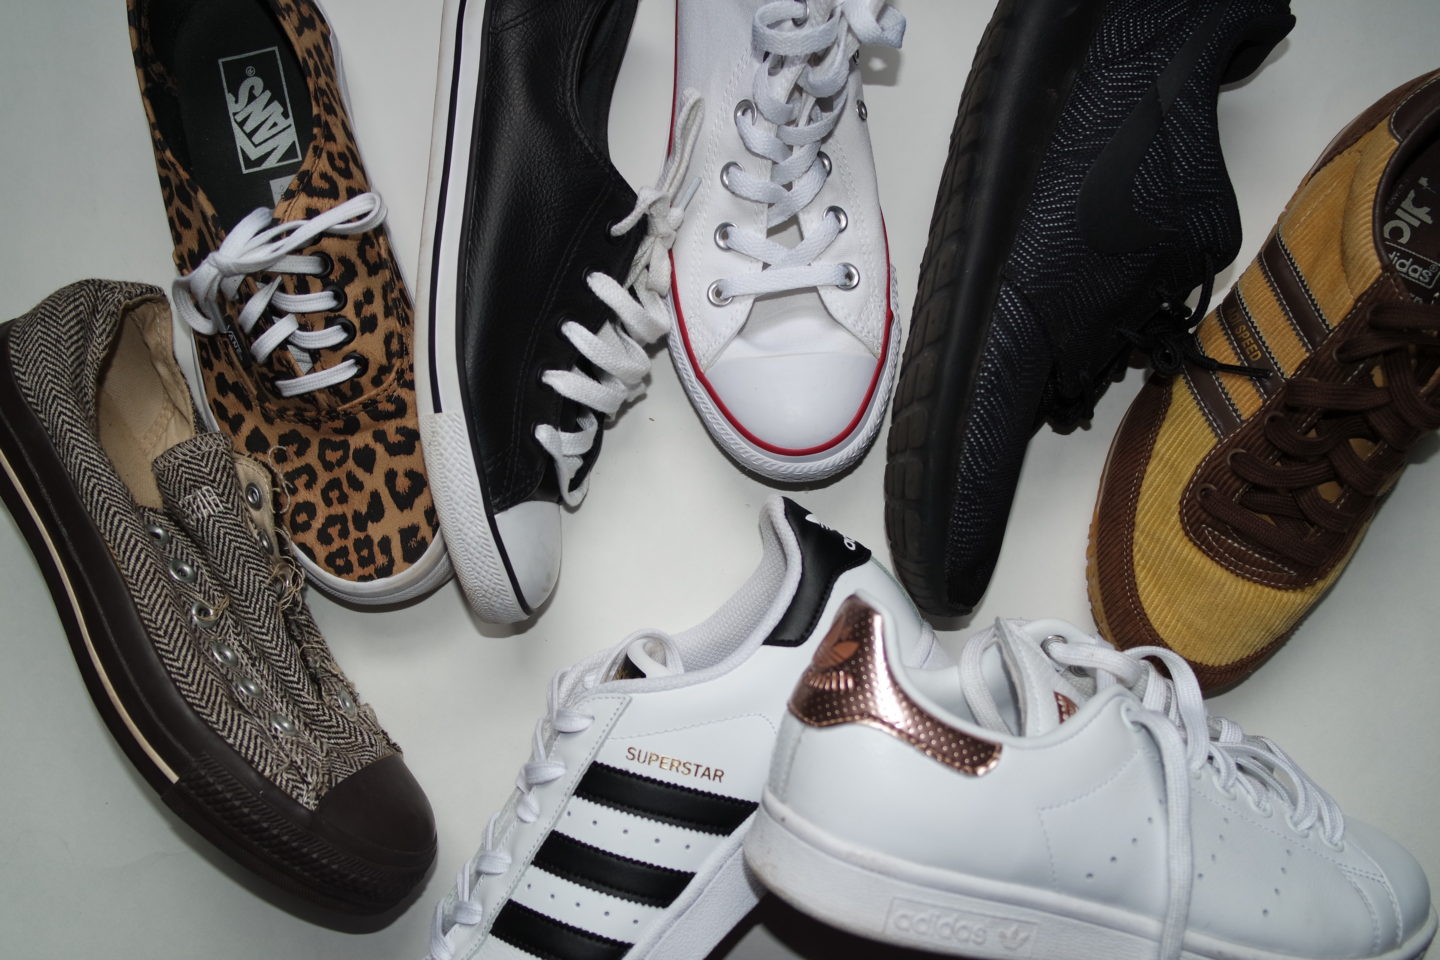 Why I Am Ditching The Heels For Sneakers